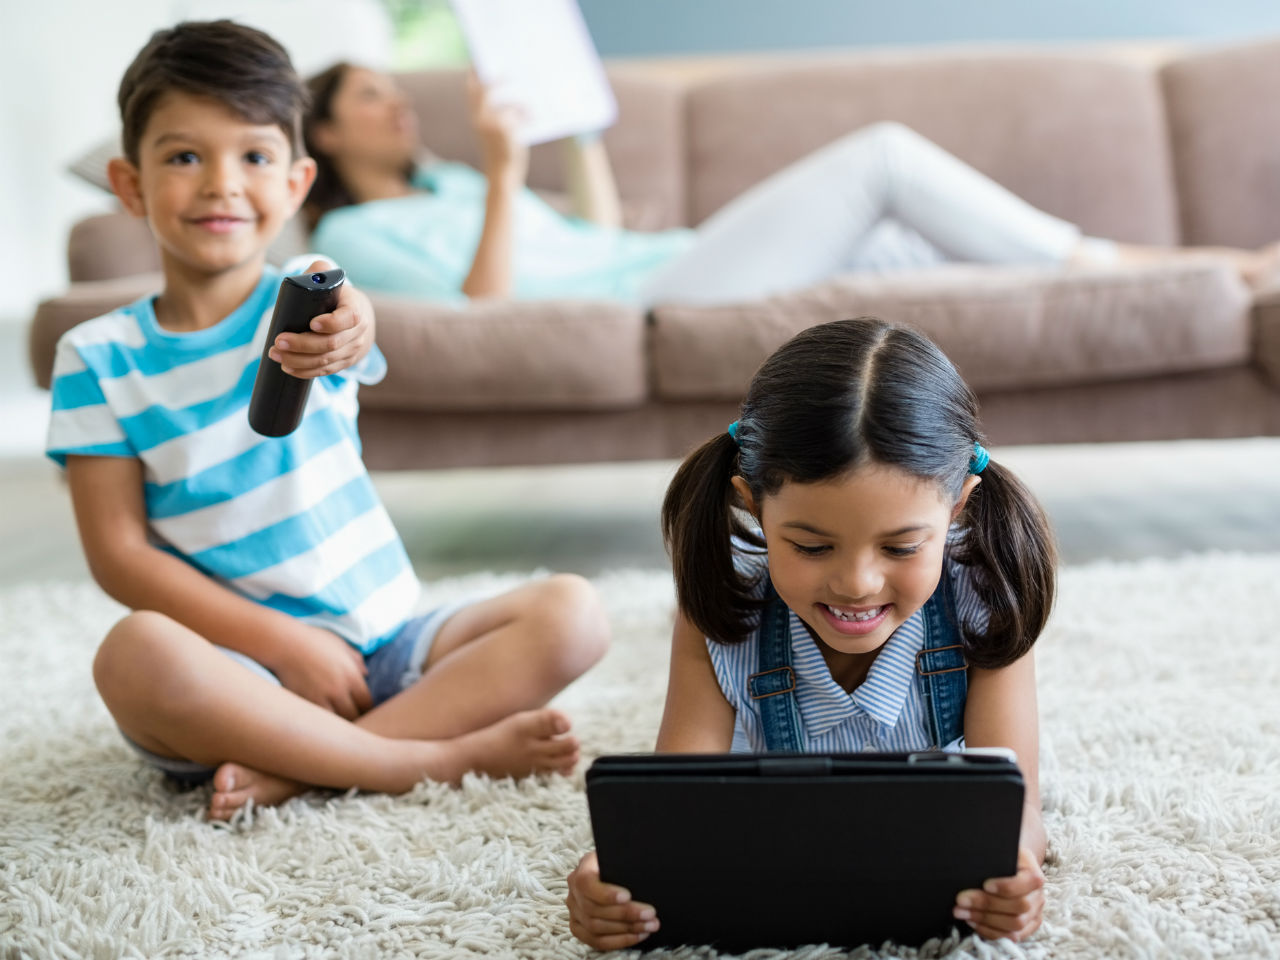 Screen addiction in kids: Does your kid fit this description?